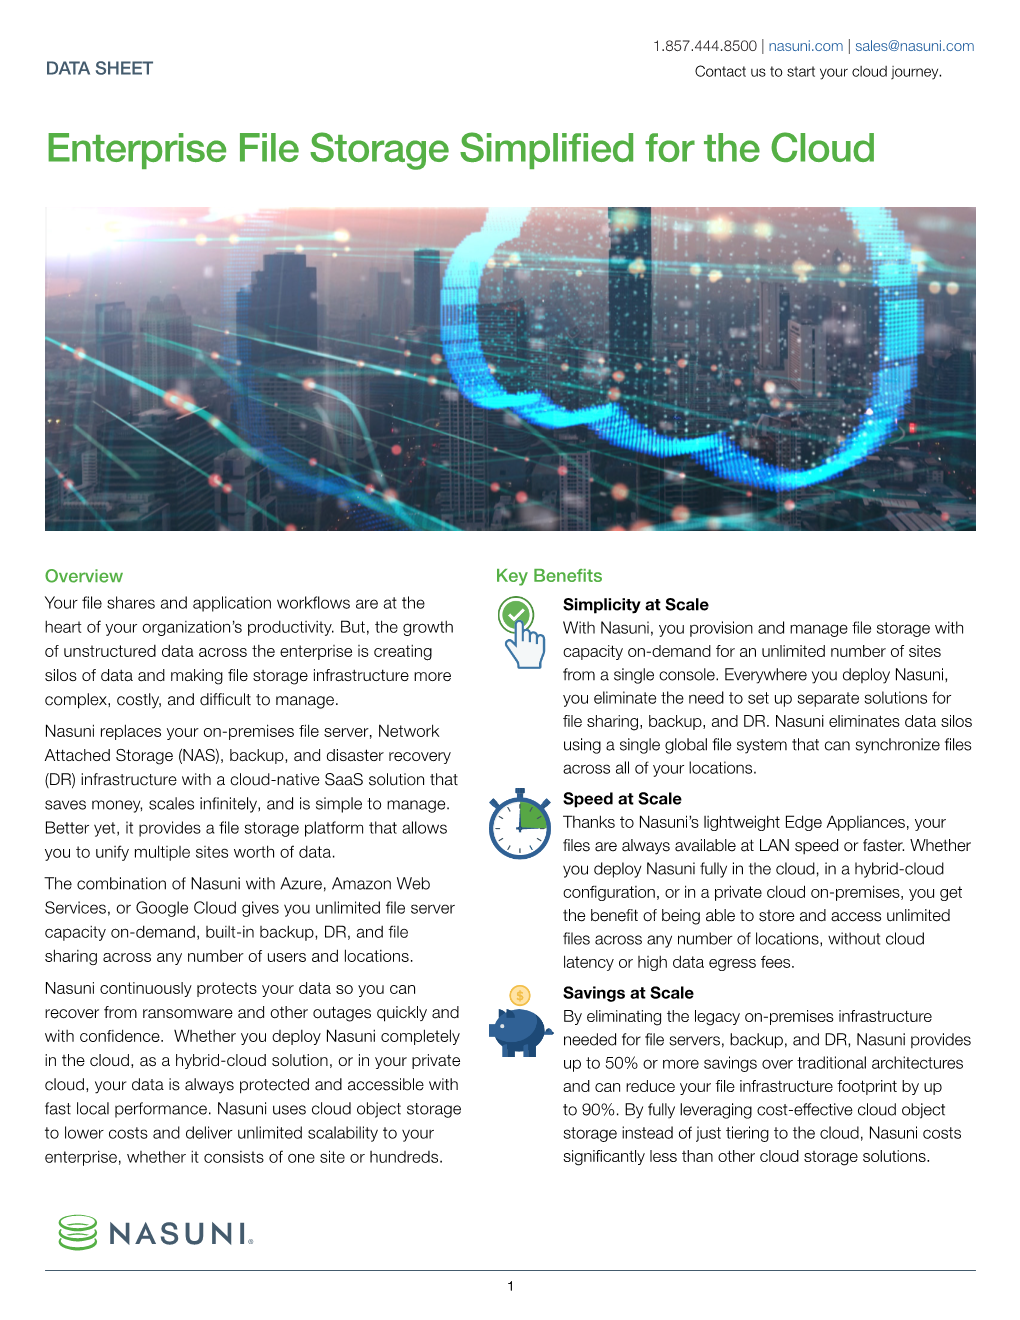 Enterprise File Storage Simplified for the Cloud